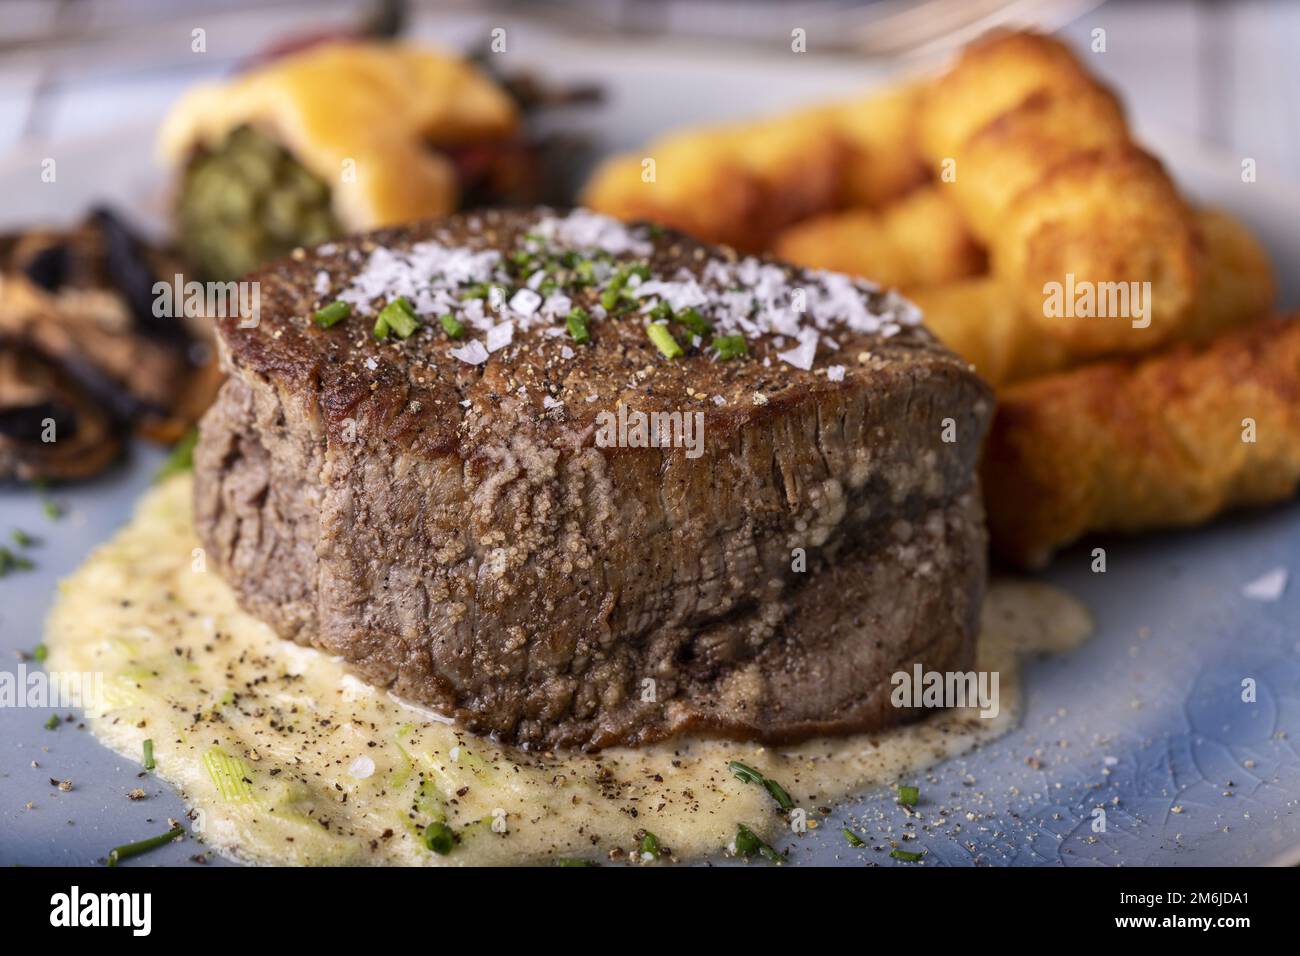 Close up of a steak on a plate Stock Photo